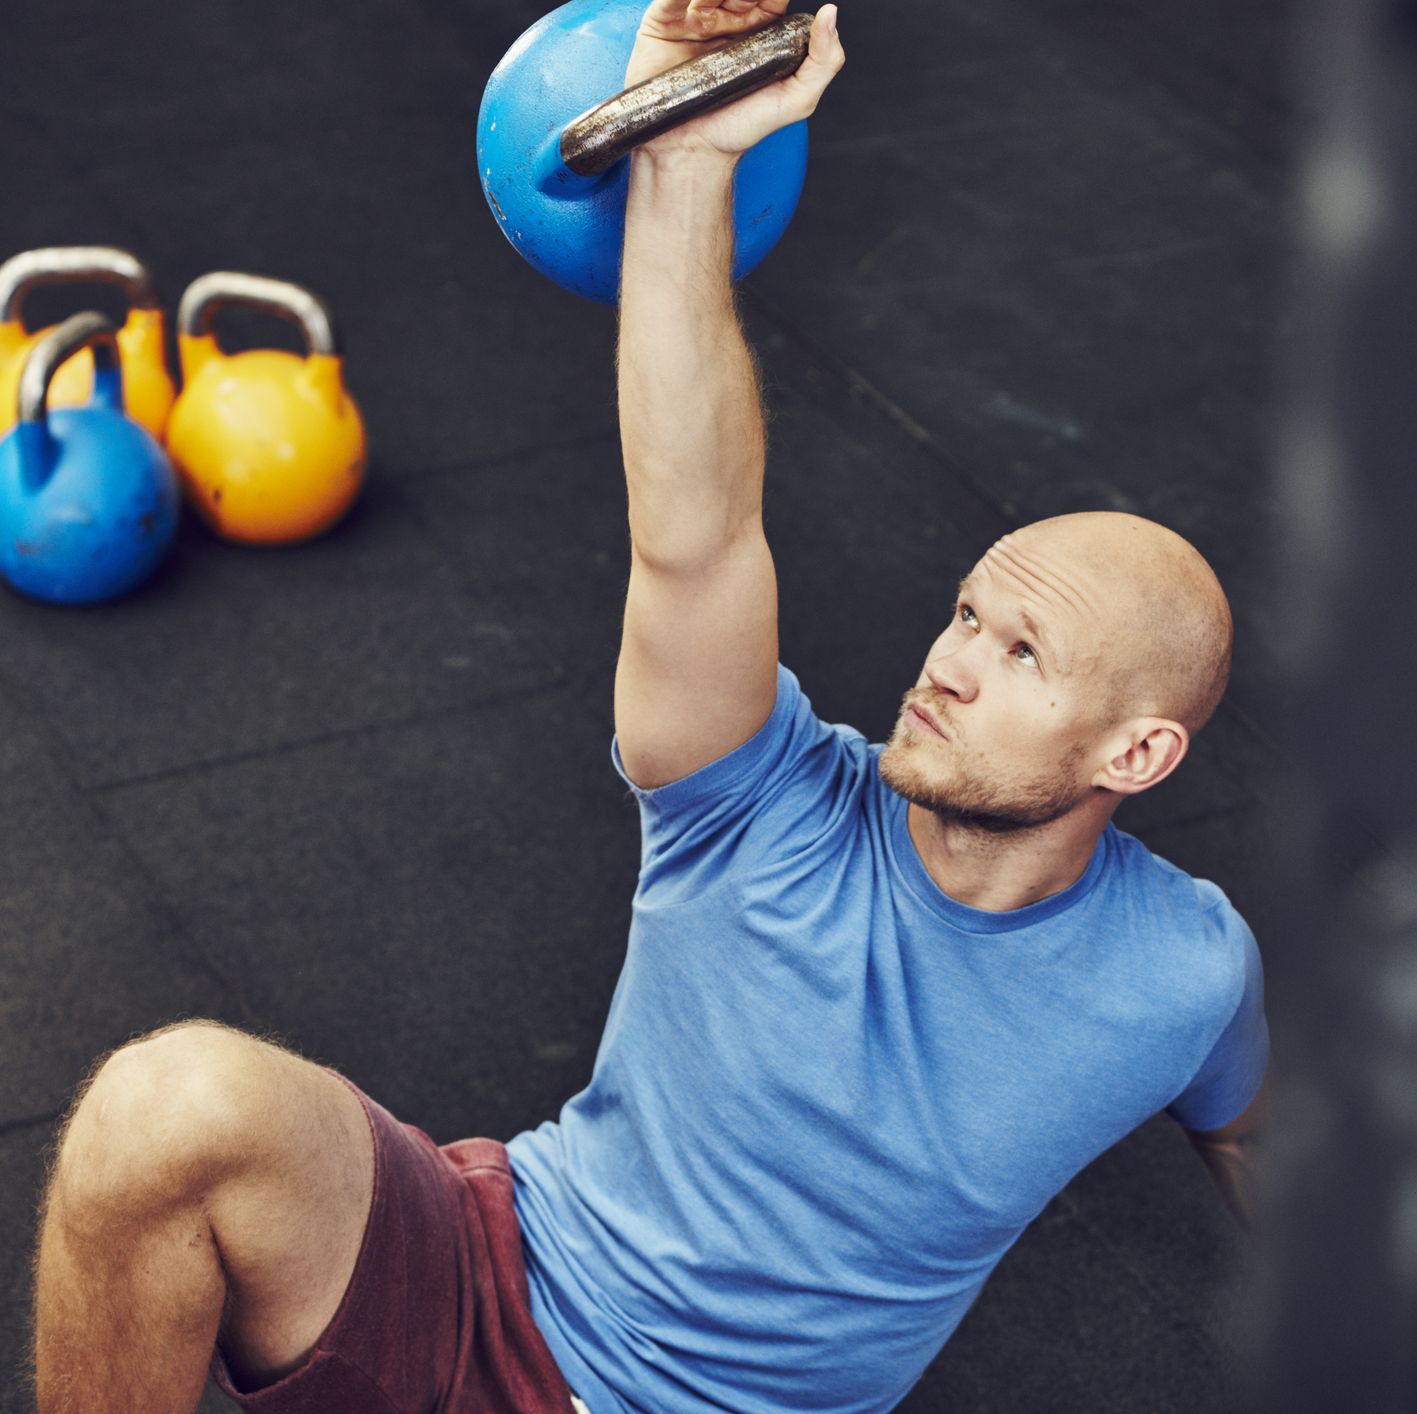 Men Over 40 Should Try This 2-Step Core Move to Boost Mobility